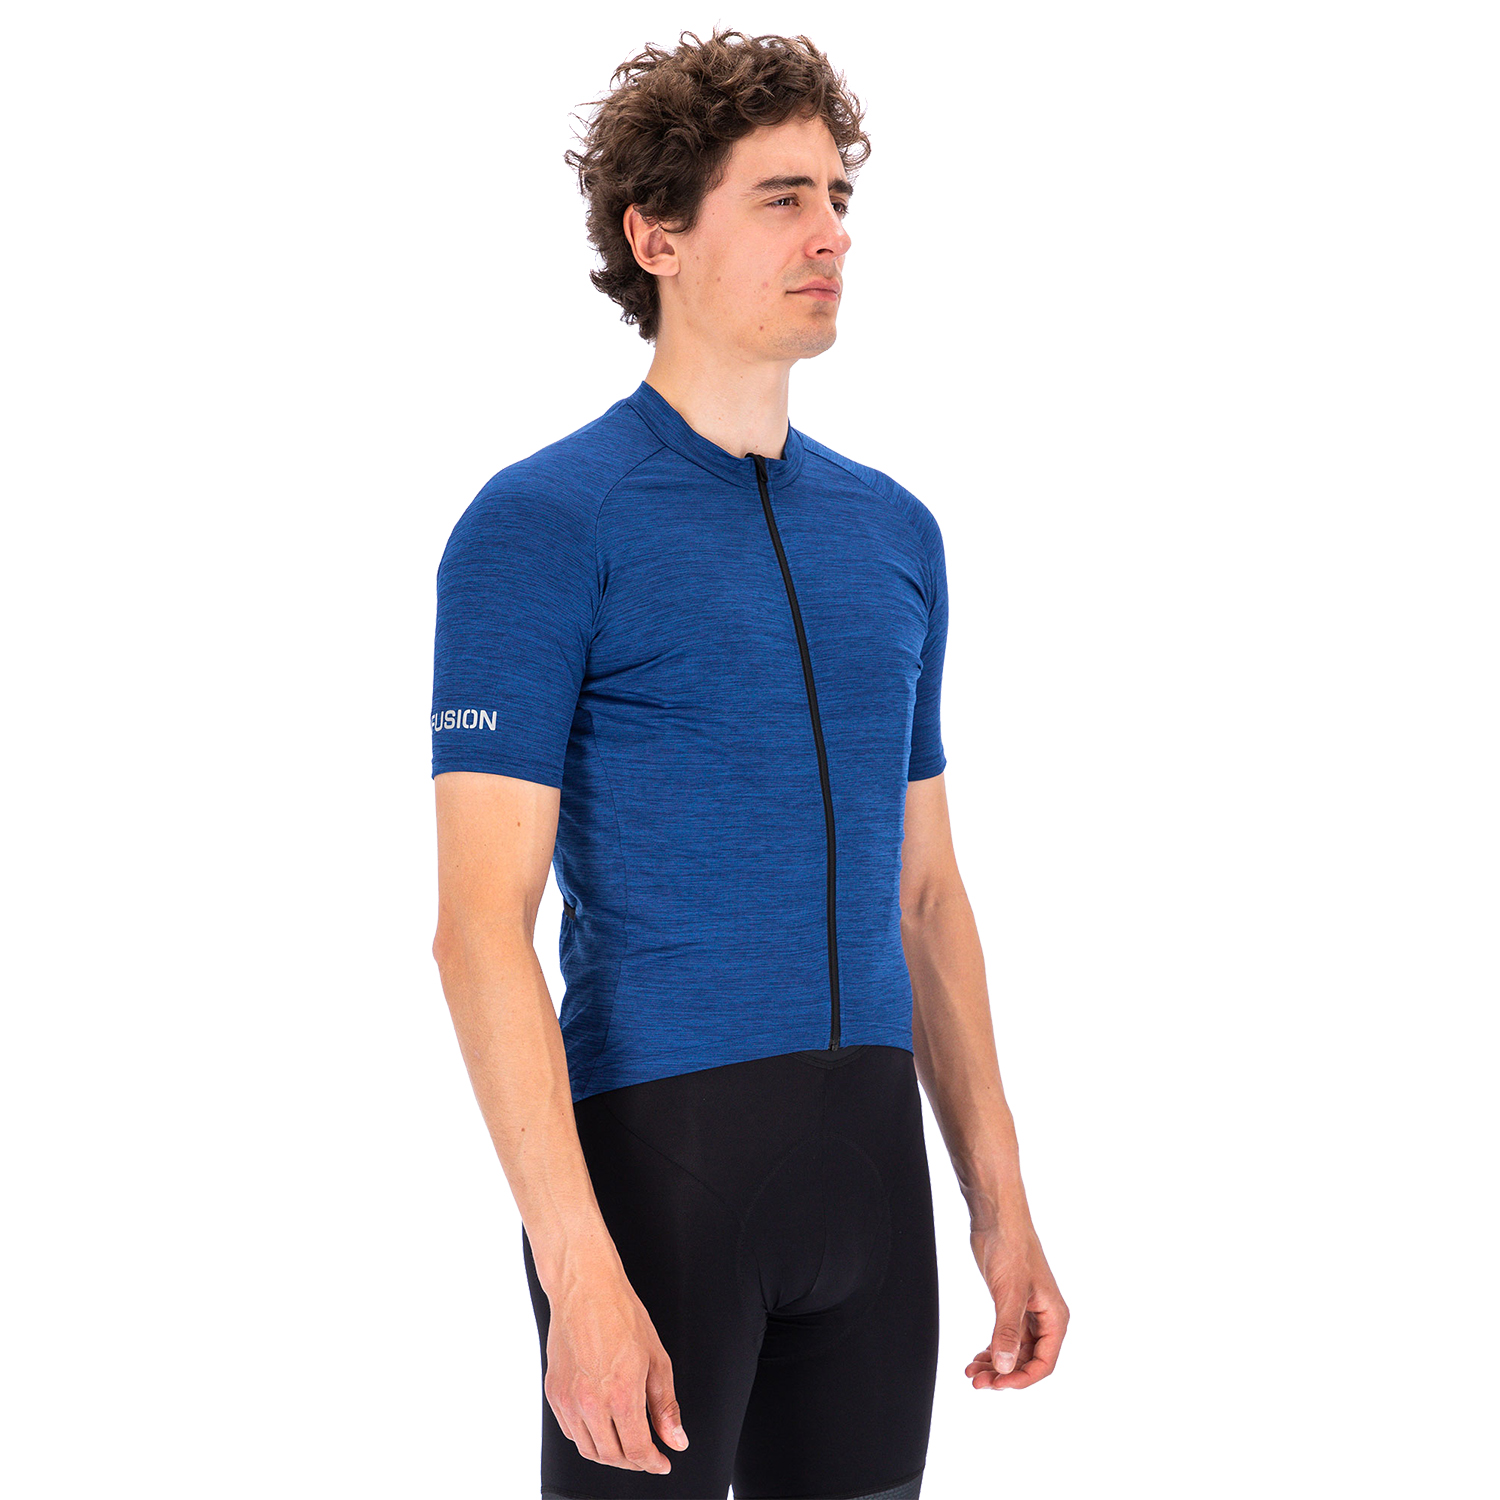 Fusion C3 Cycling Jersey donkerblauw Unisex  0198-BL